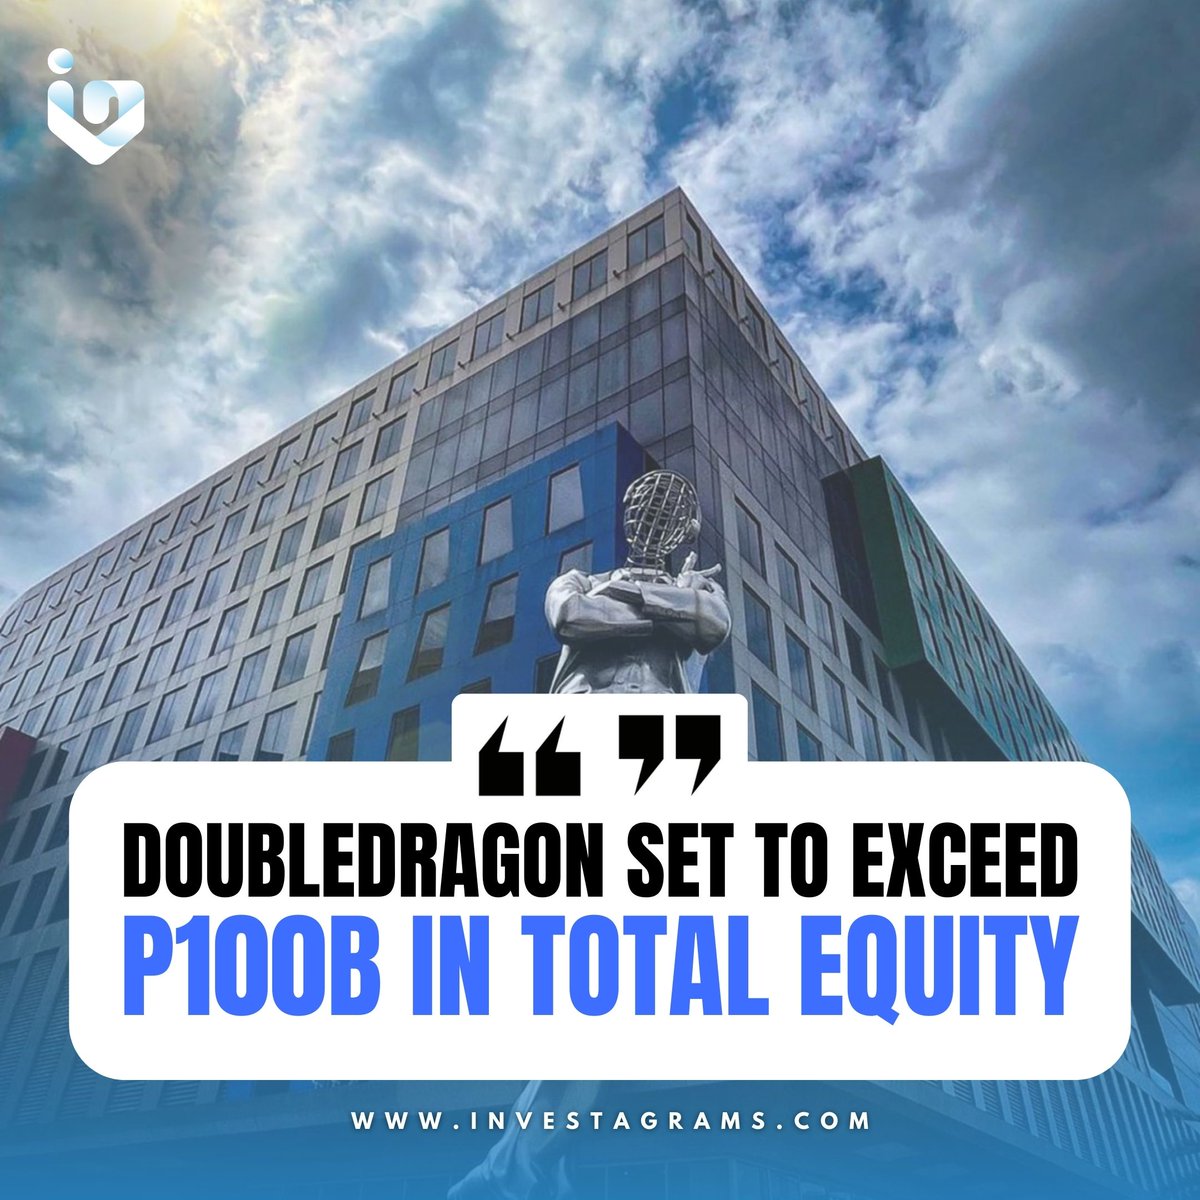 DOUBLEDRAGON SET TO EXCEED P100B IN TOTAL EQUITY

DoubleDragon Corporation ($DD) is expected to surpass P100 Billion in Total Equity for the first time in 2024. This would make it one of the few companies in the Philippines with Total Equity at 12 digit level.